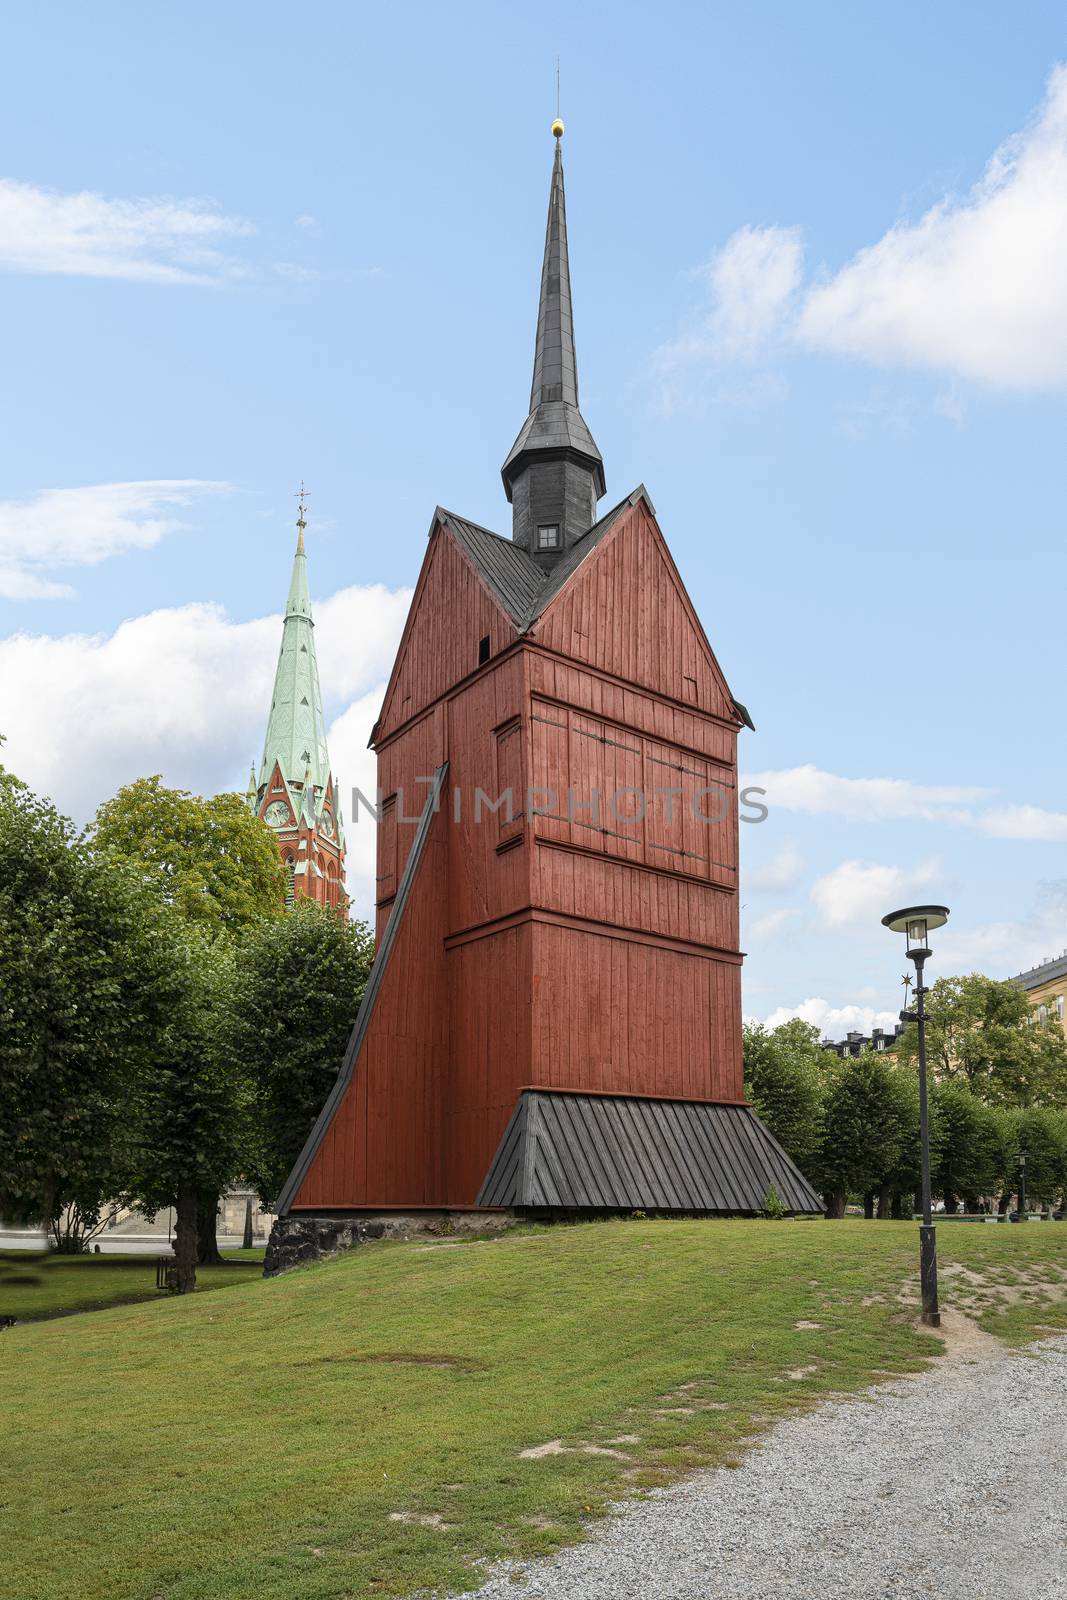 Stockholm, Sweden. September 2019. A view of the  John's wooden Bell Tower in the parl
